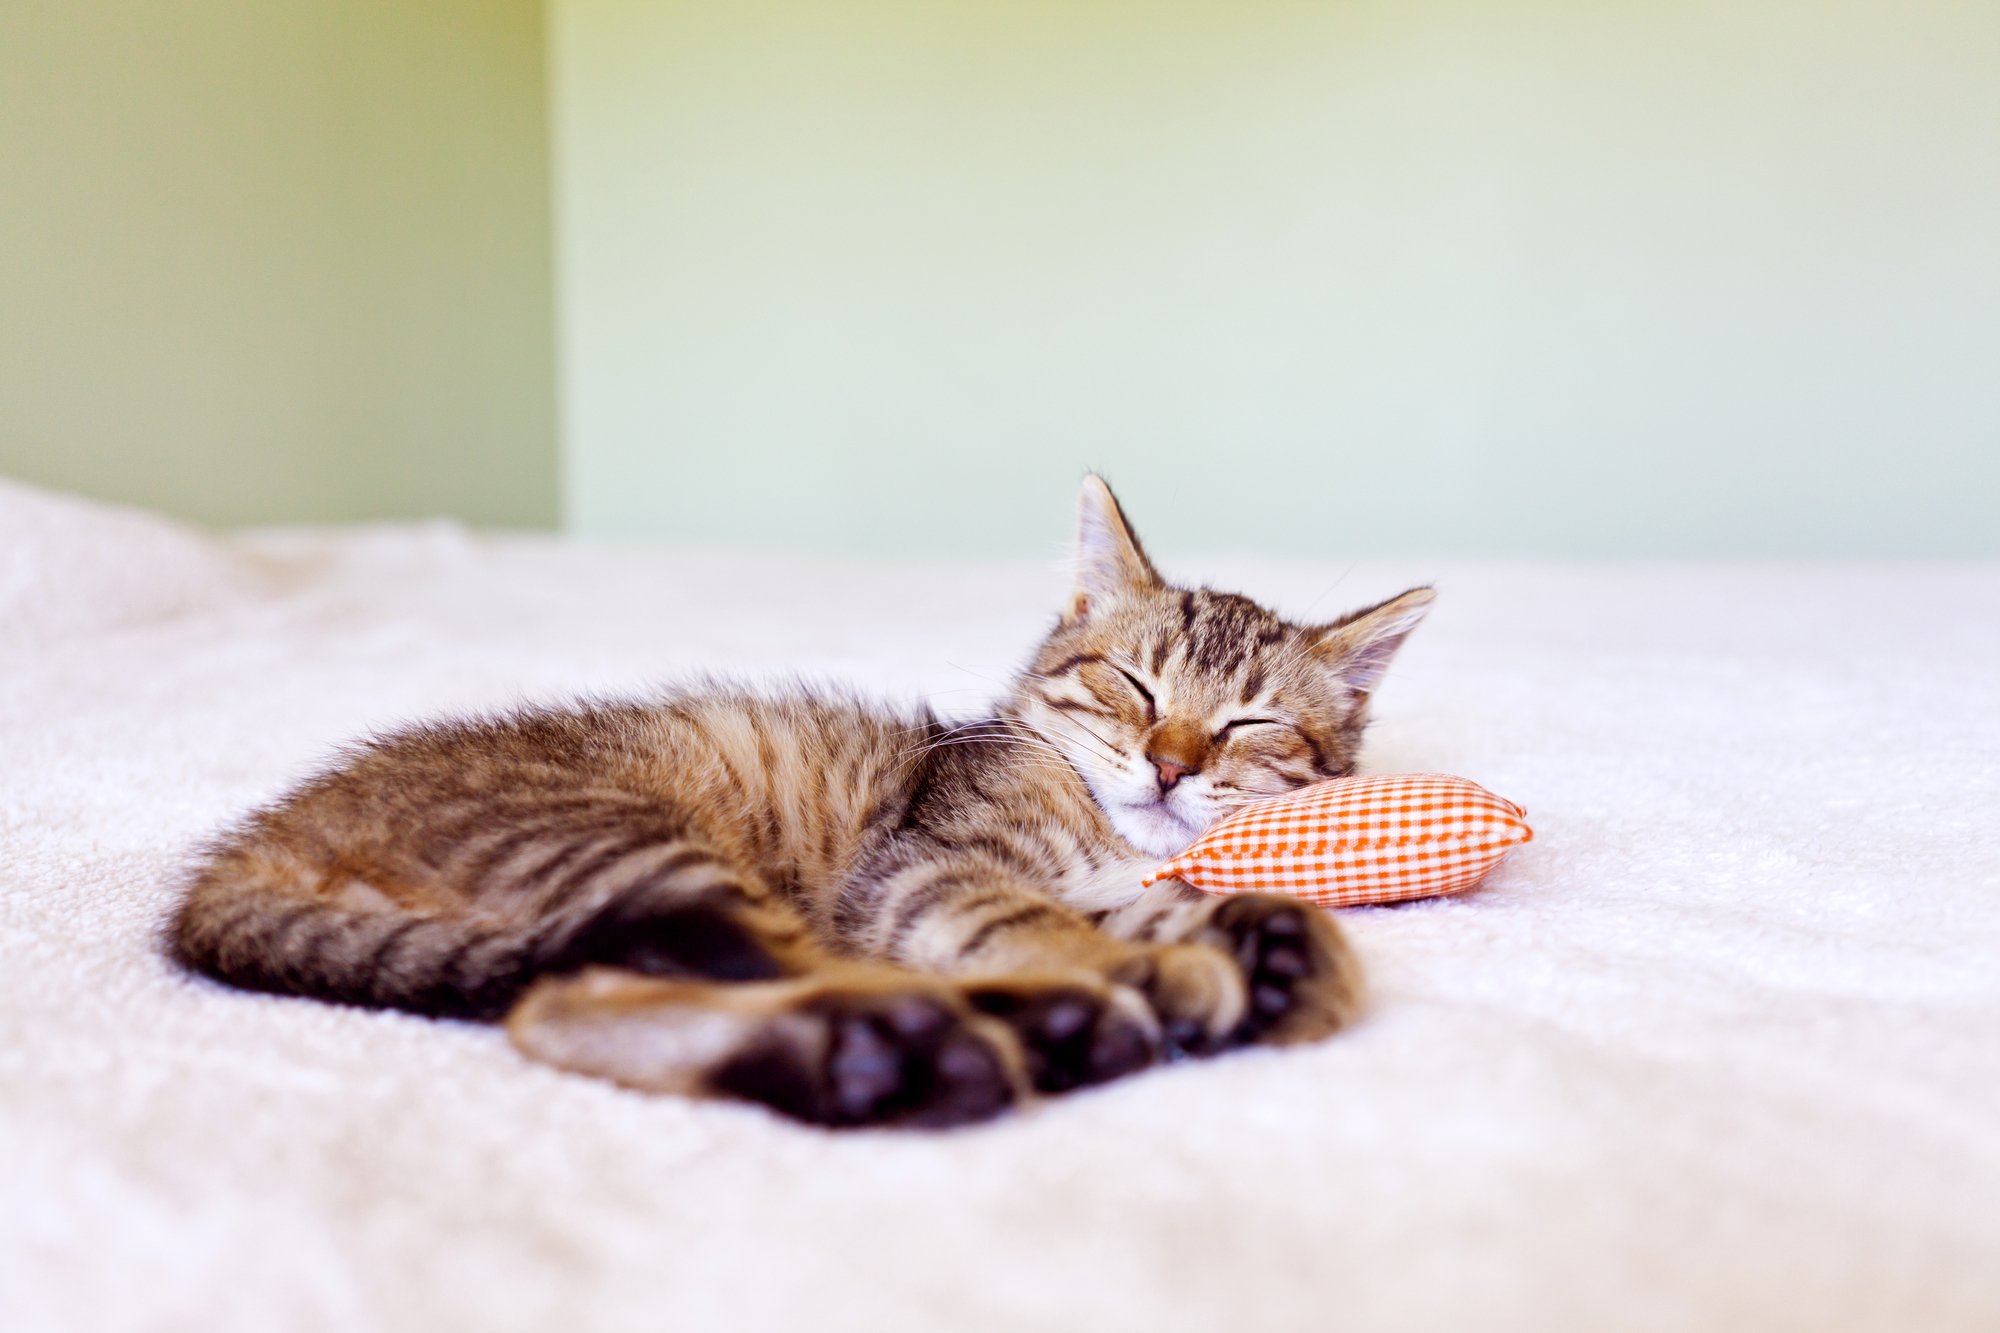 Is Your Cat Sad? Signs and Causes of Cat Depression